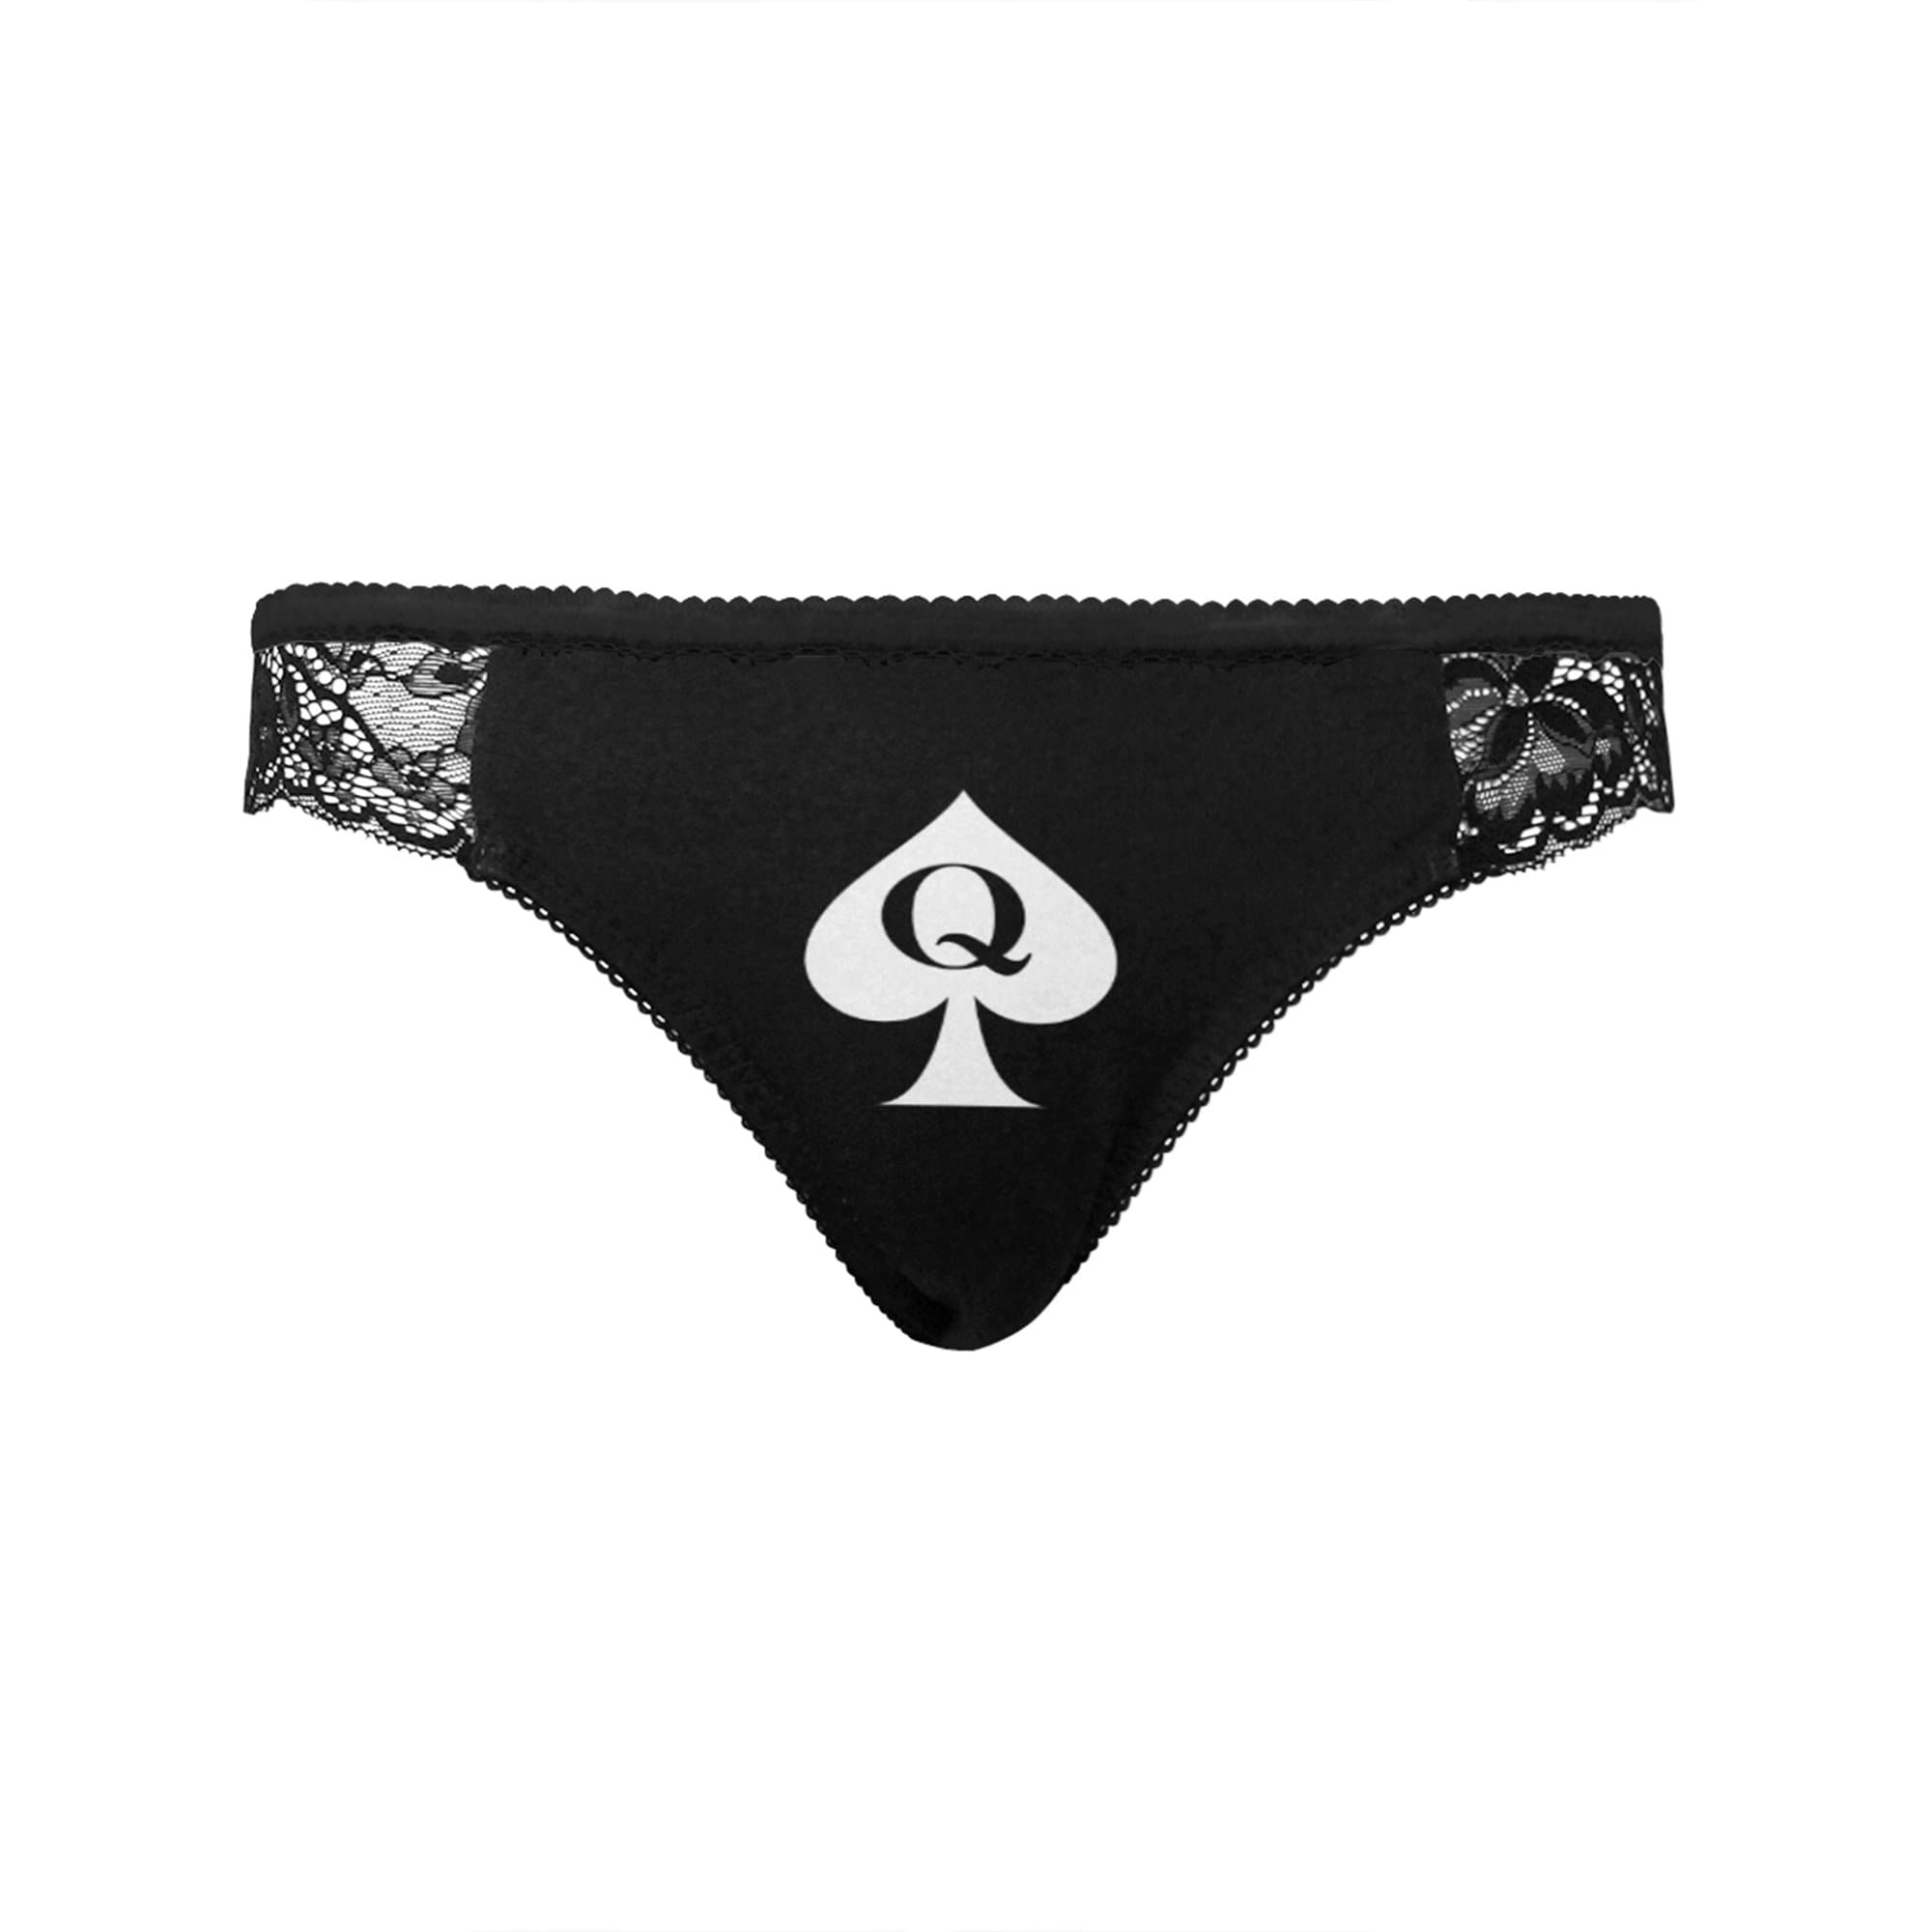 Queen Of Spades Women S Black Lace Panties Bbc Only Panty Hotwife Panties Hotwife Clothing